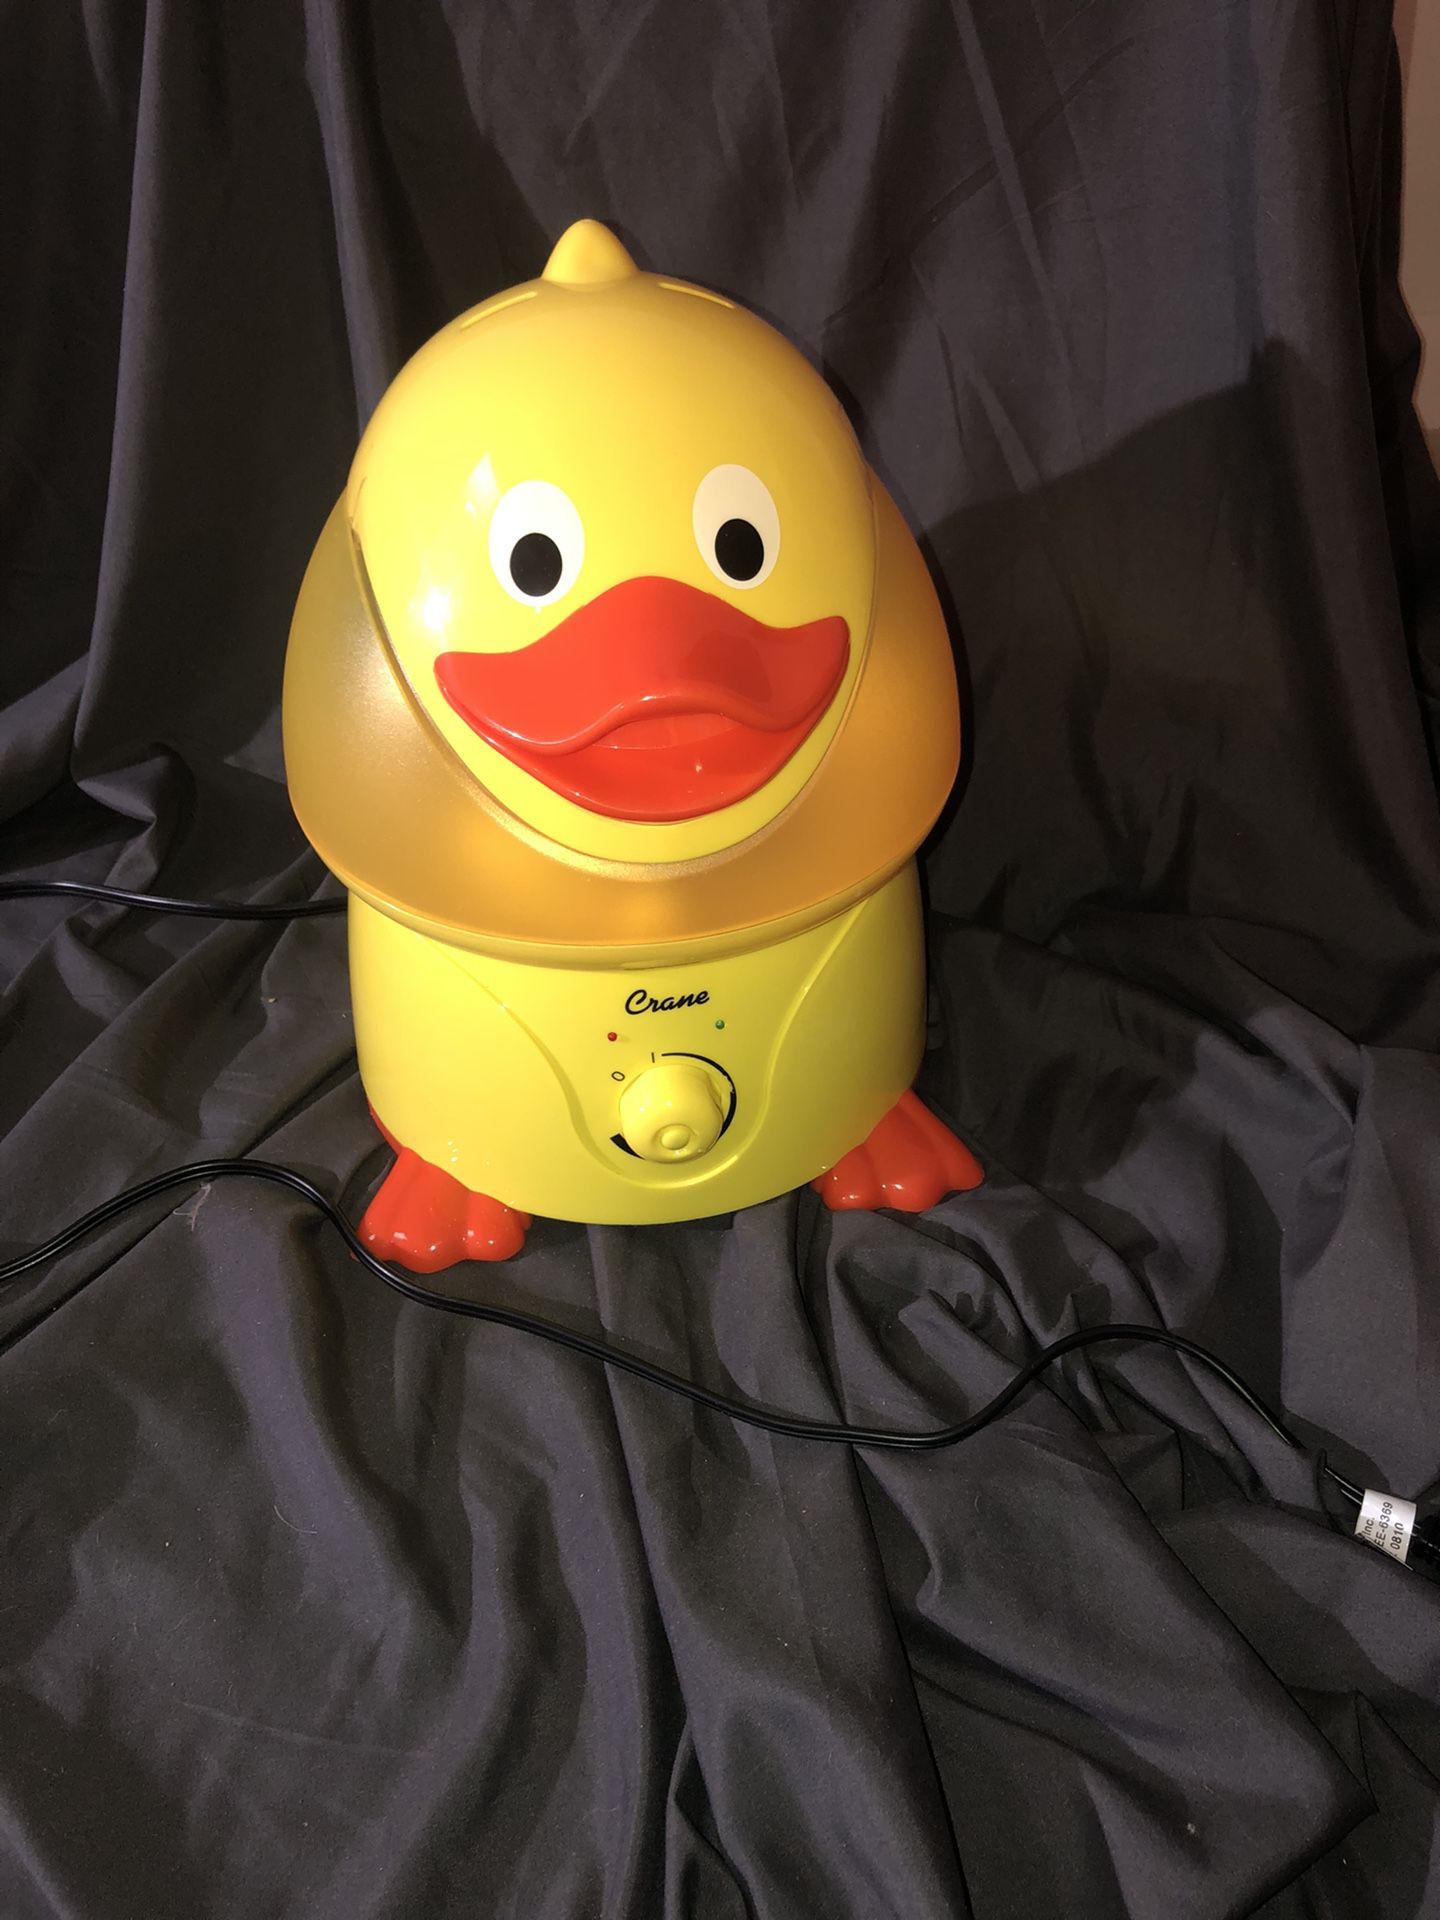 Crane Ultrasonic Cool Mist Humidifier, Duck great for your kids room! Works good